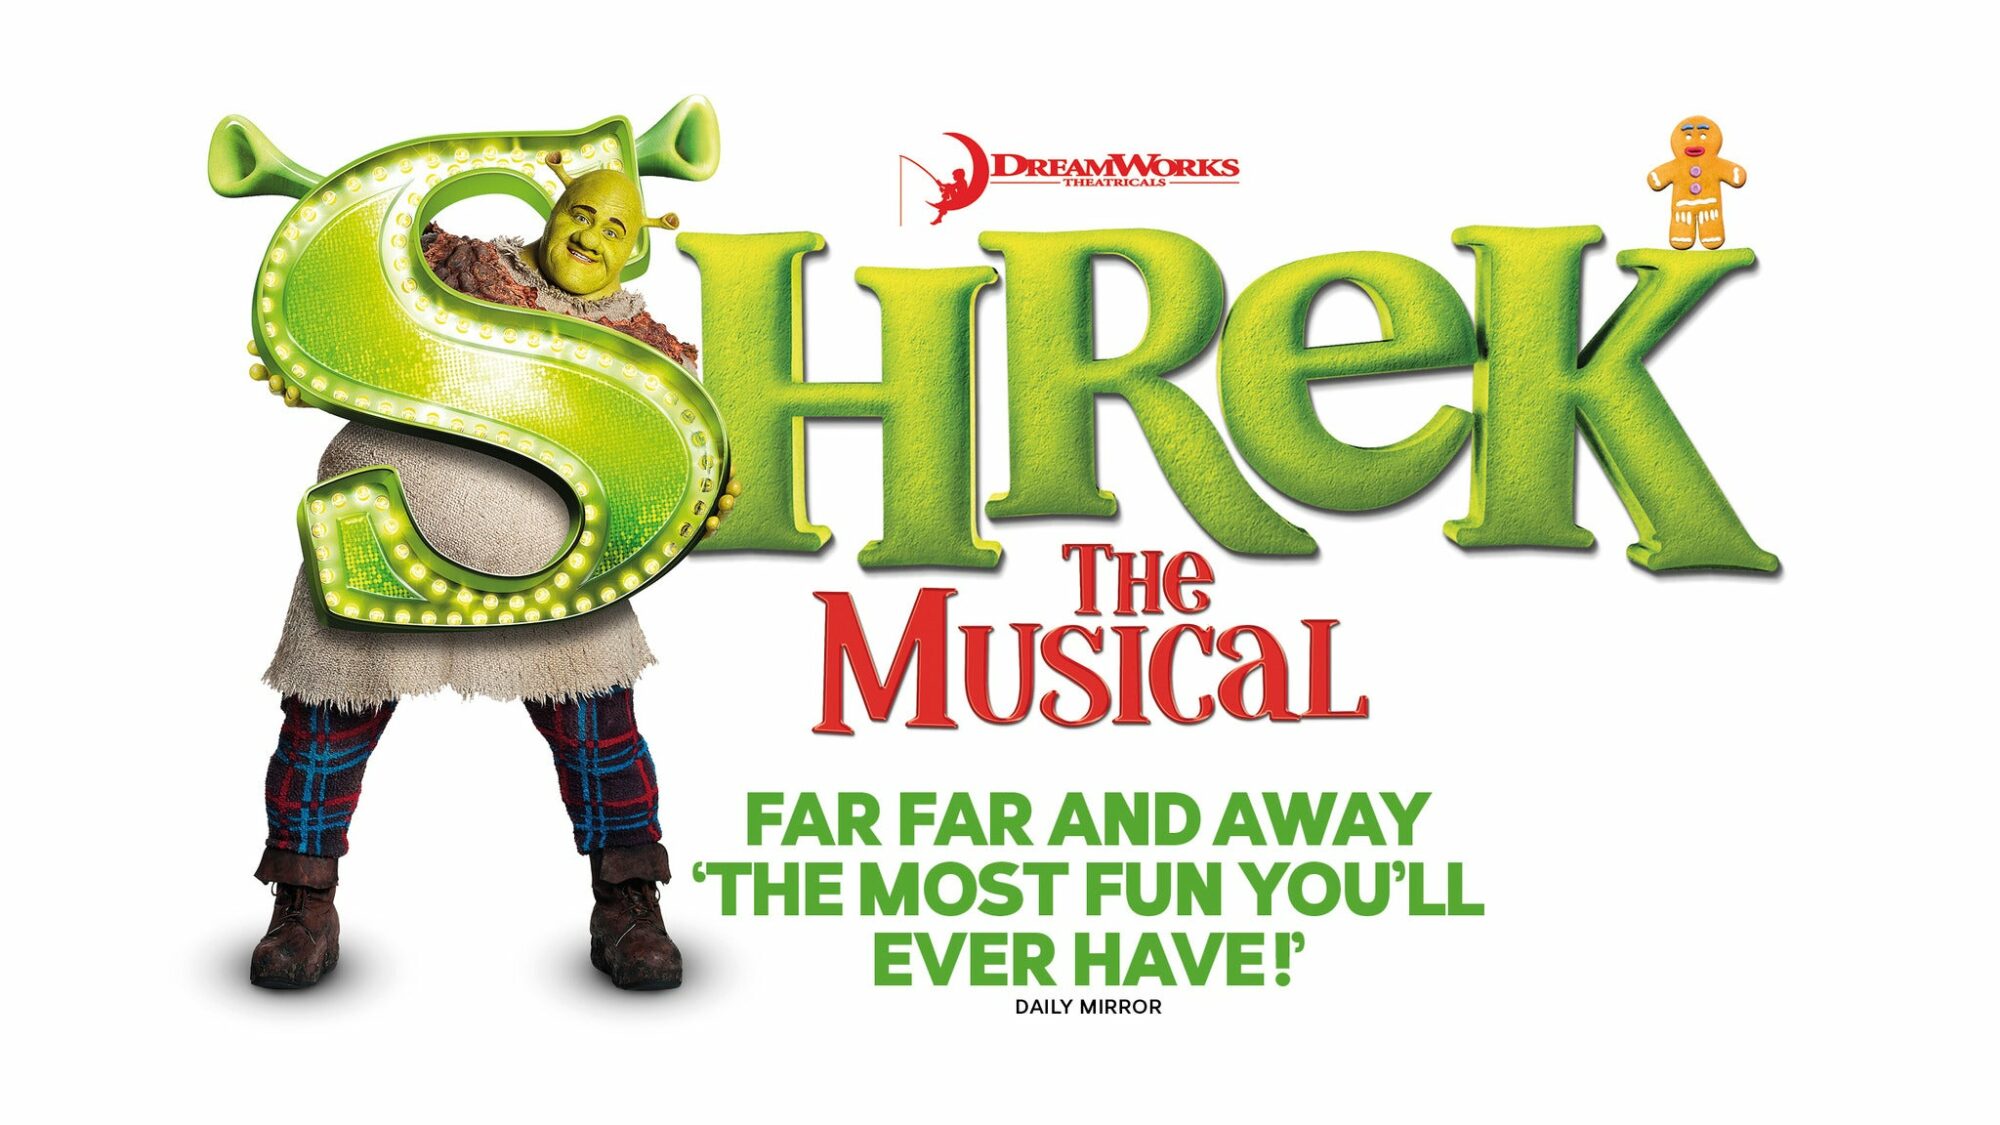 Image name Shrek The Musical JR at Whitby Pavilion Theatre Whitby the 10 image from the post Shrek: The Musical JR at Whitby Pavilion Theatre, Whitby in Yorkshire.com.